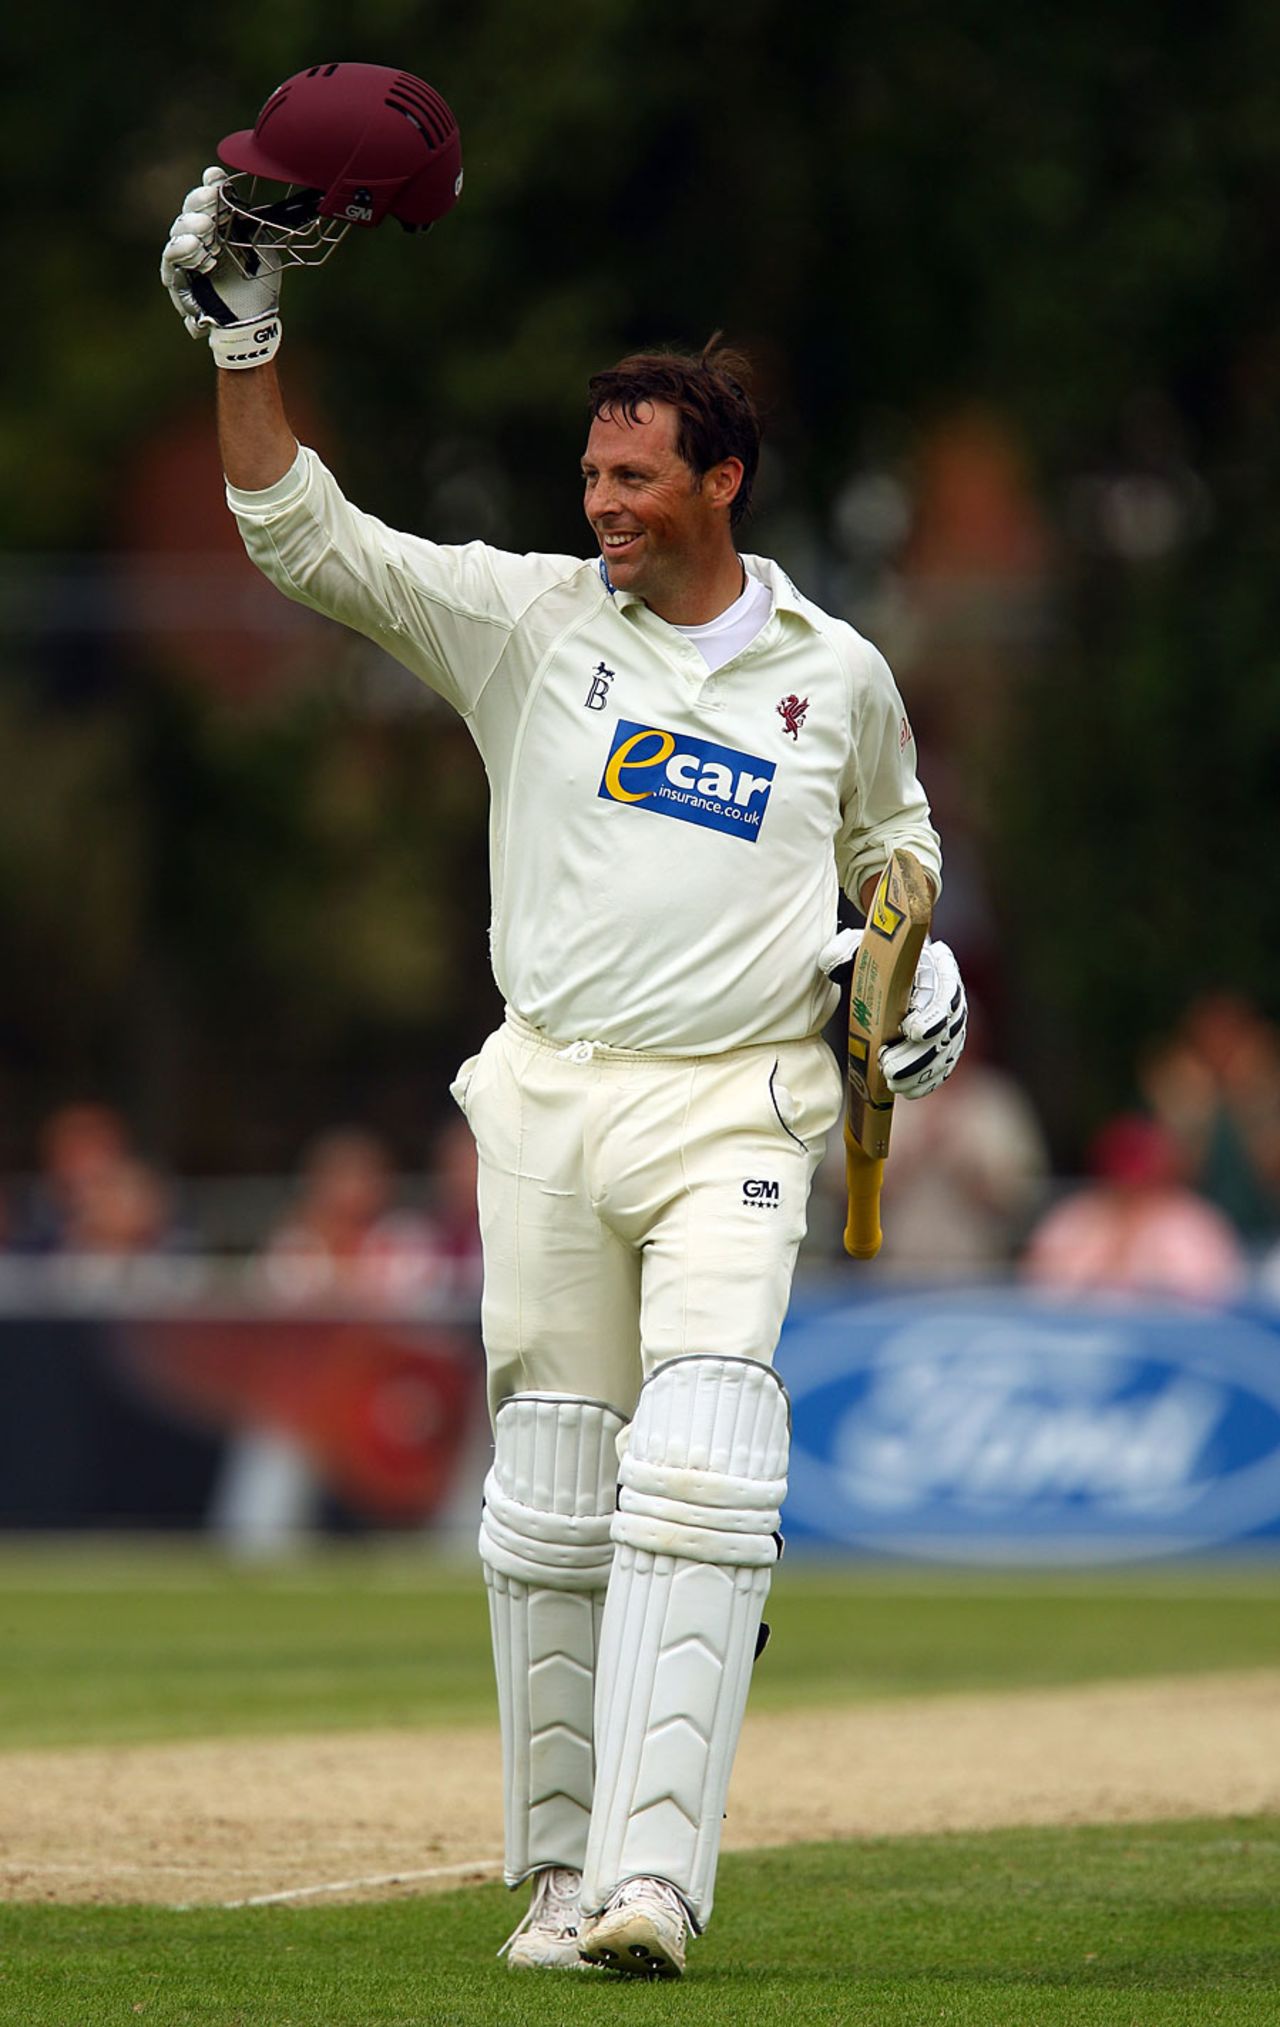 Marcus Trescothick acknowledges the applause after reaching his century from 126 balls, Essex v Somerset, County Championship Division One, Colchester, August 19 2010